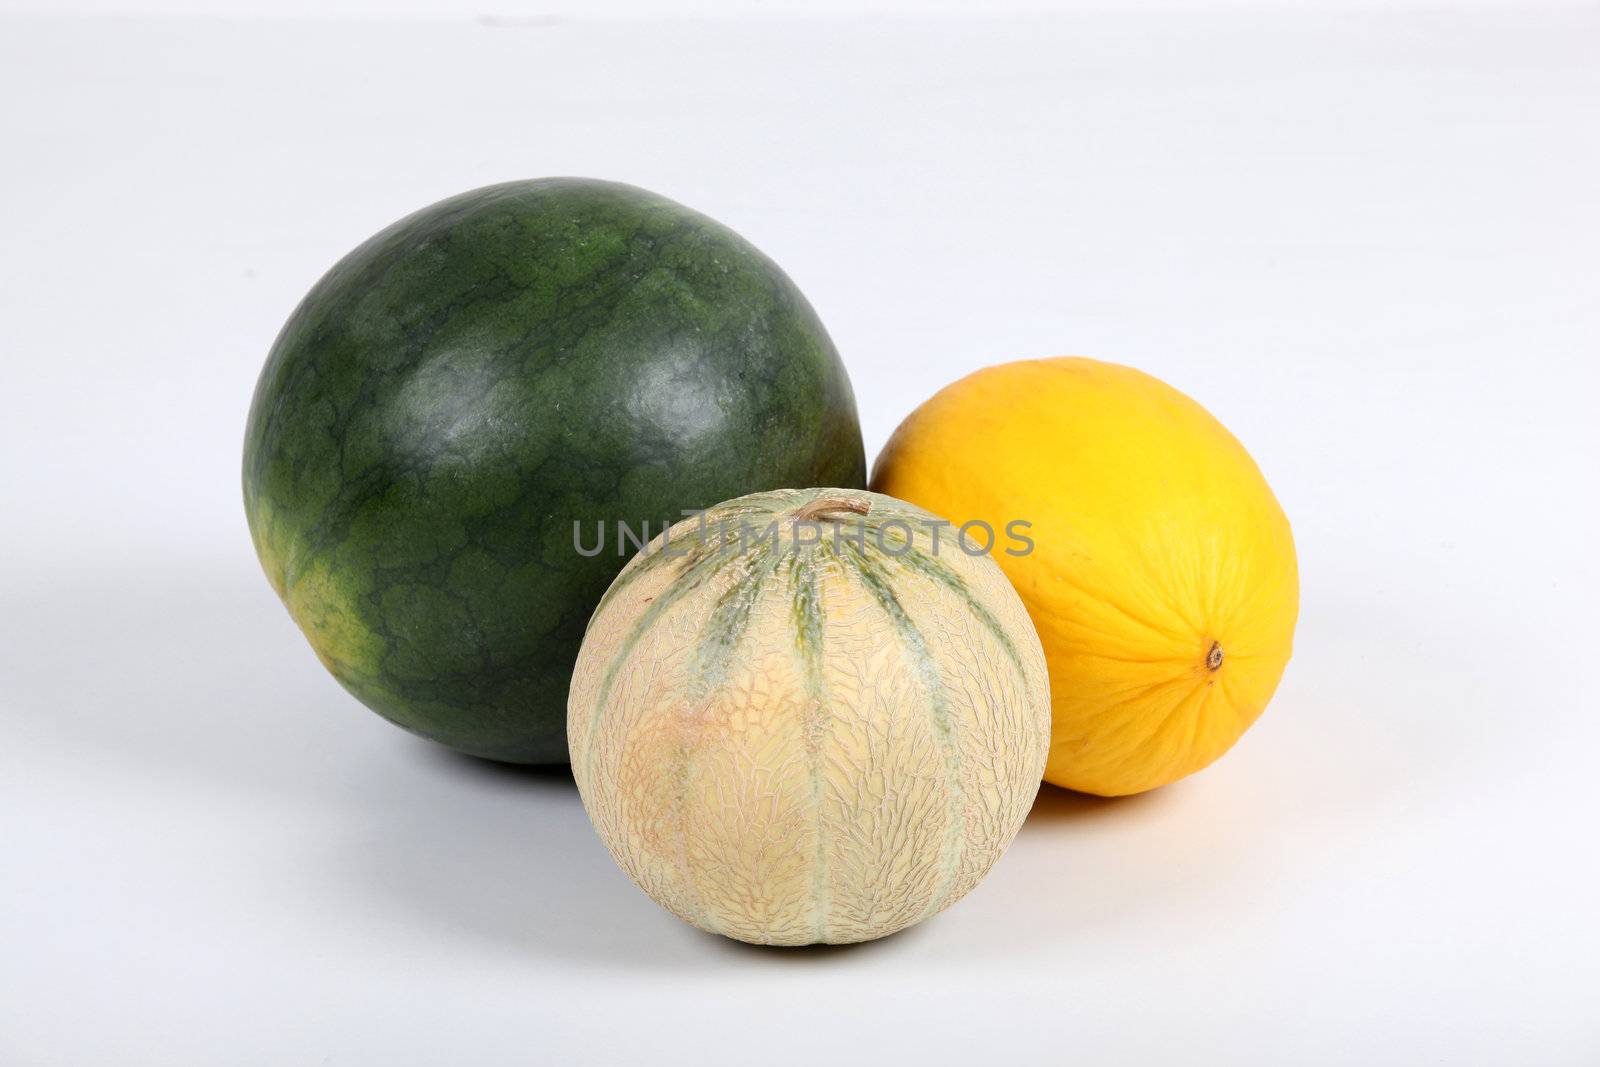 Different melons by phovoir